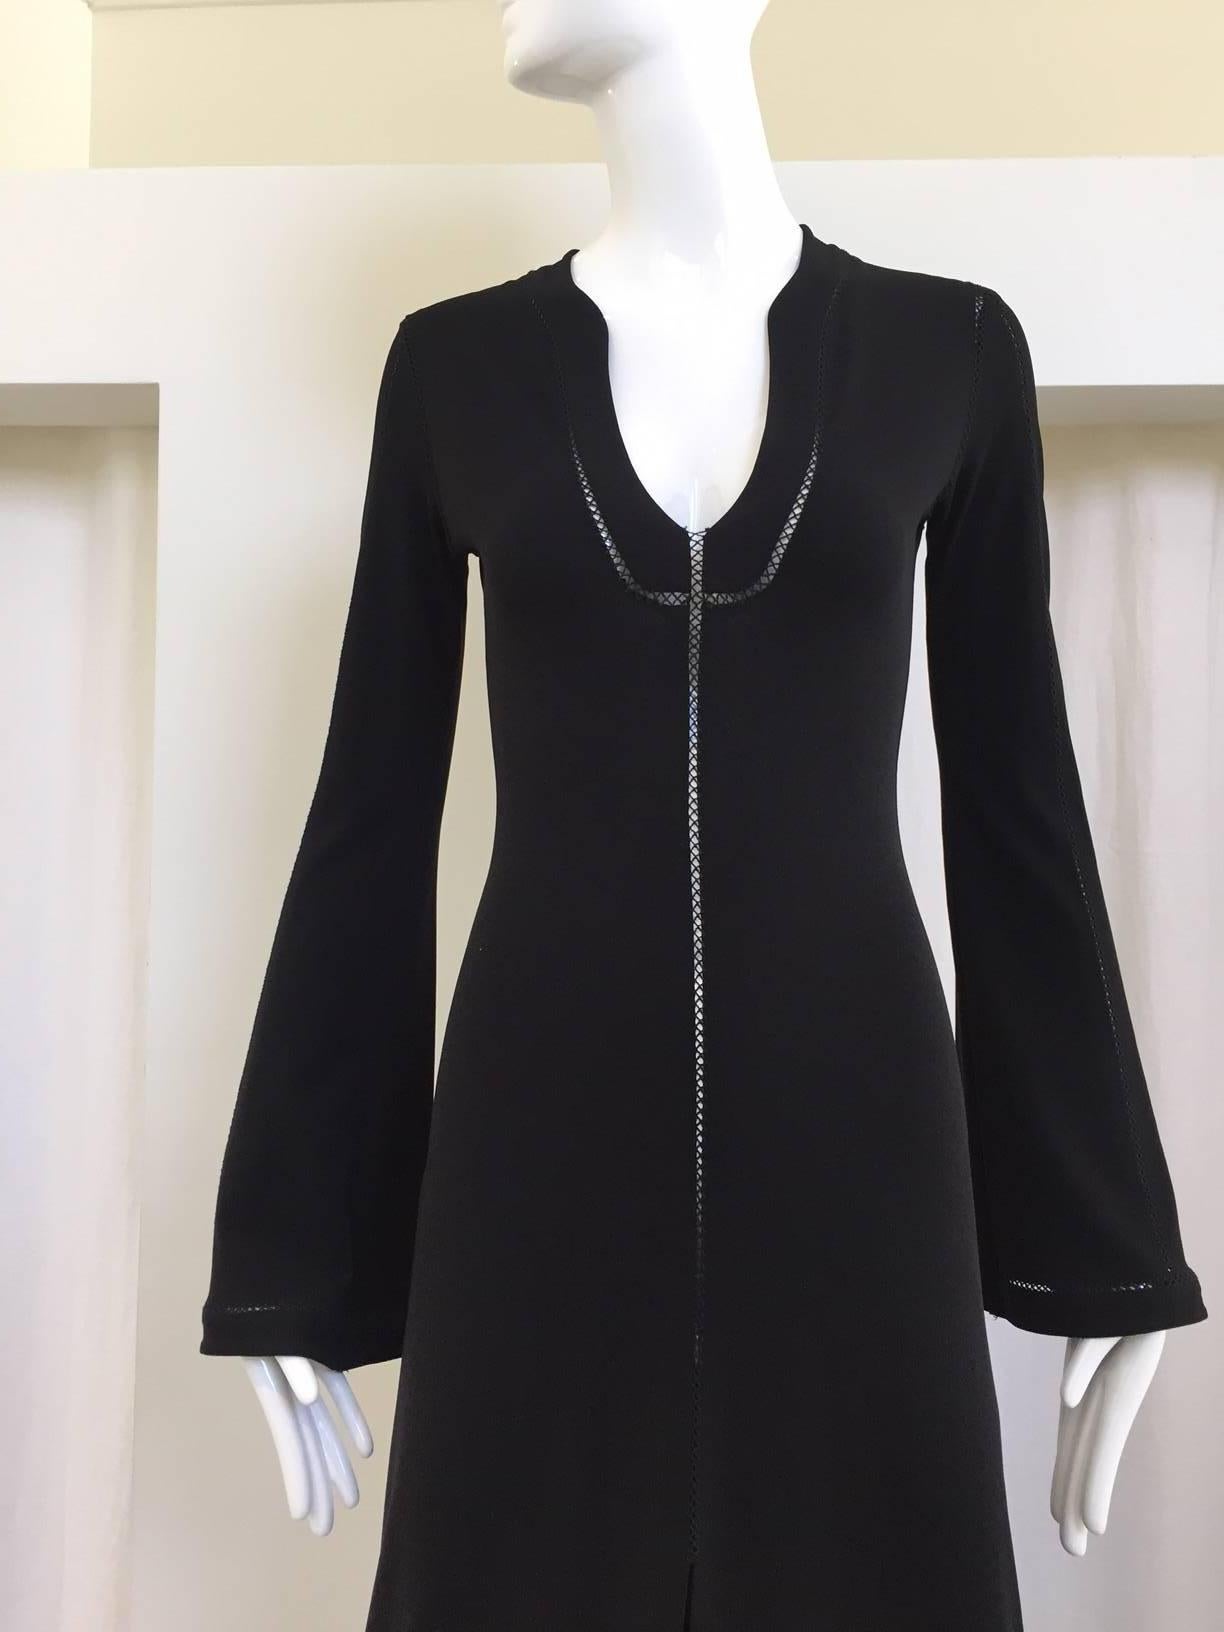 Sexy 1970s inspired plein sud black rayon jersey cut out stitch dress. 
Front slit and cut out stitch all over the sleeve, front and back. Sexy and chic.
Size: Small - 4
Bust: 32